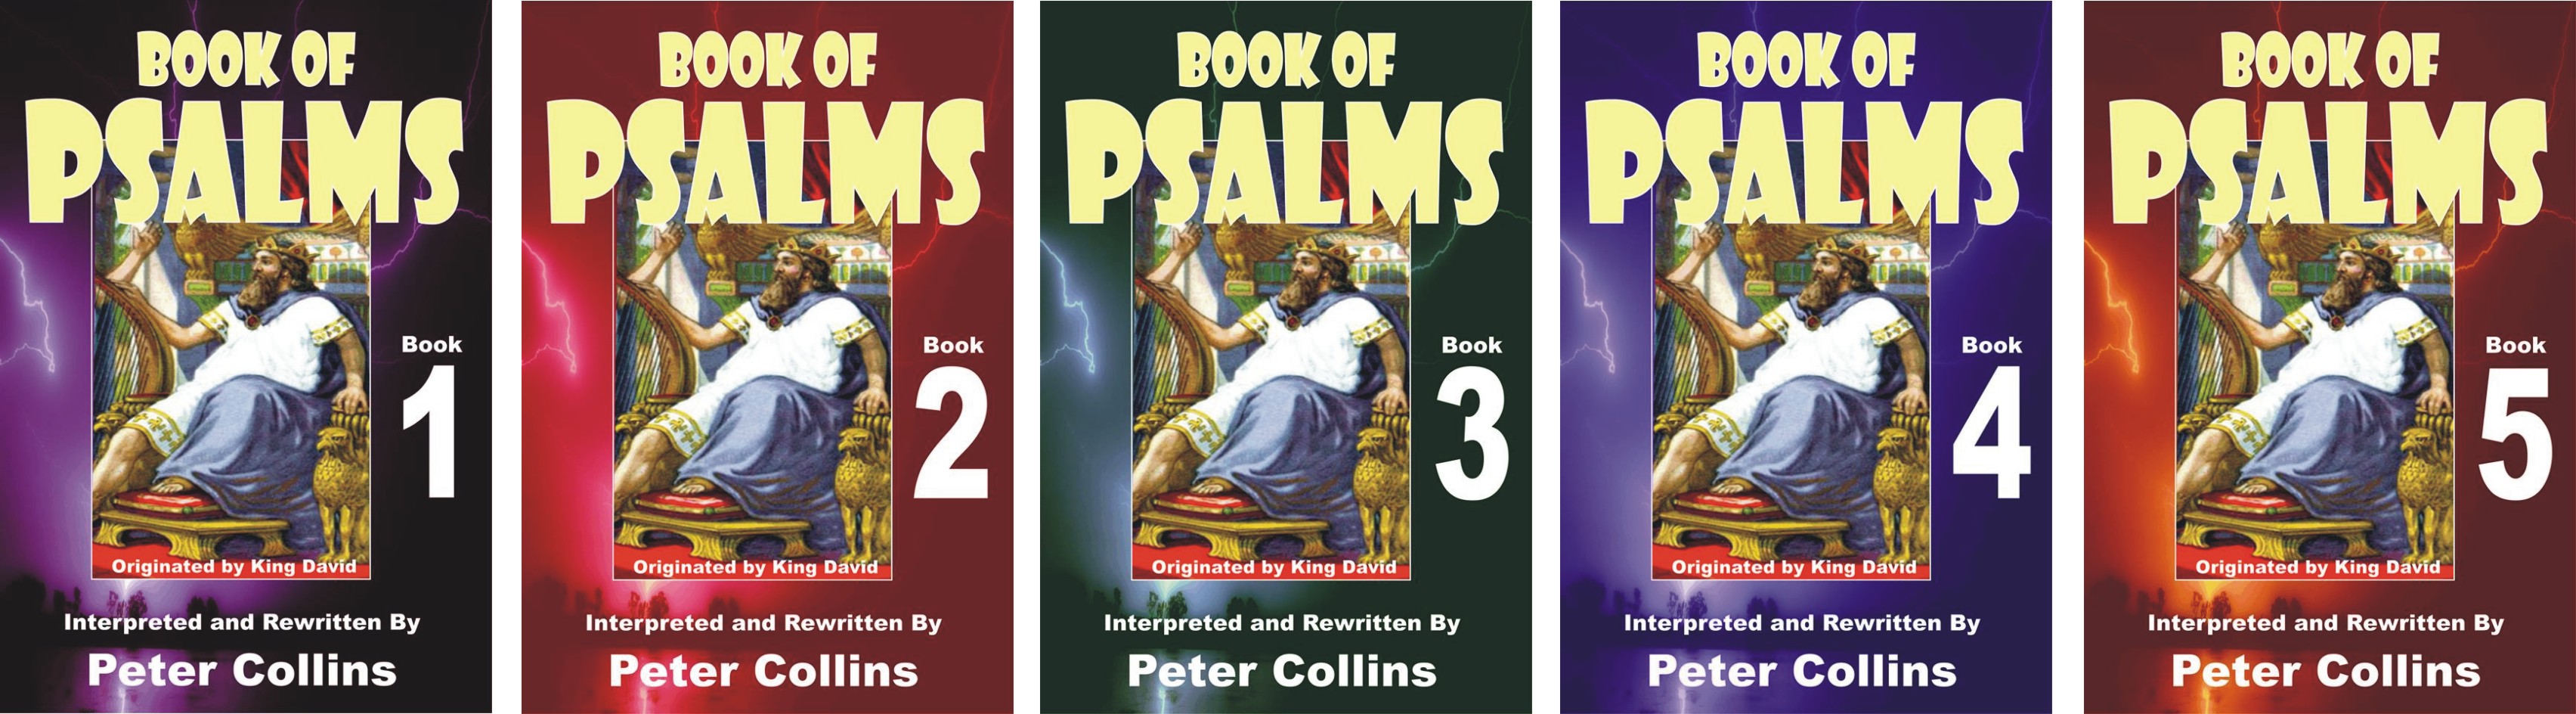 book-of-psalms-montage